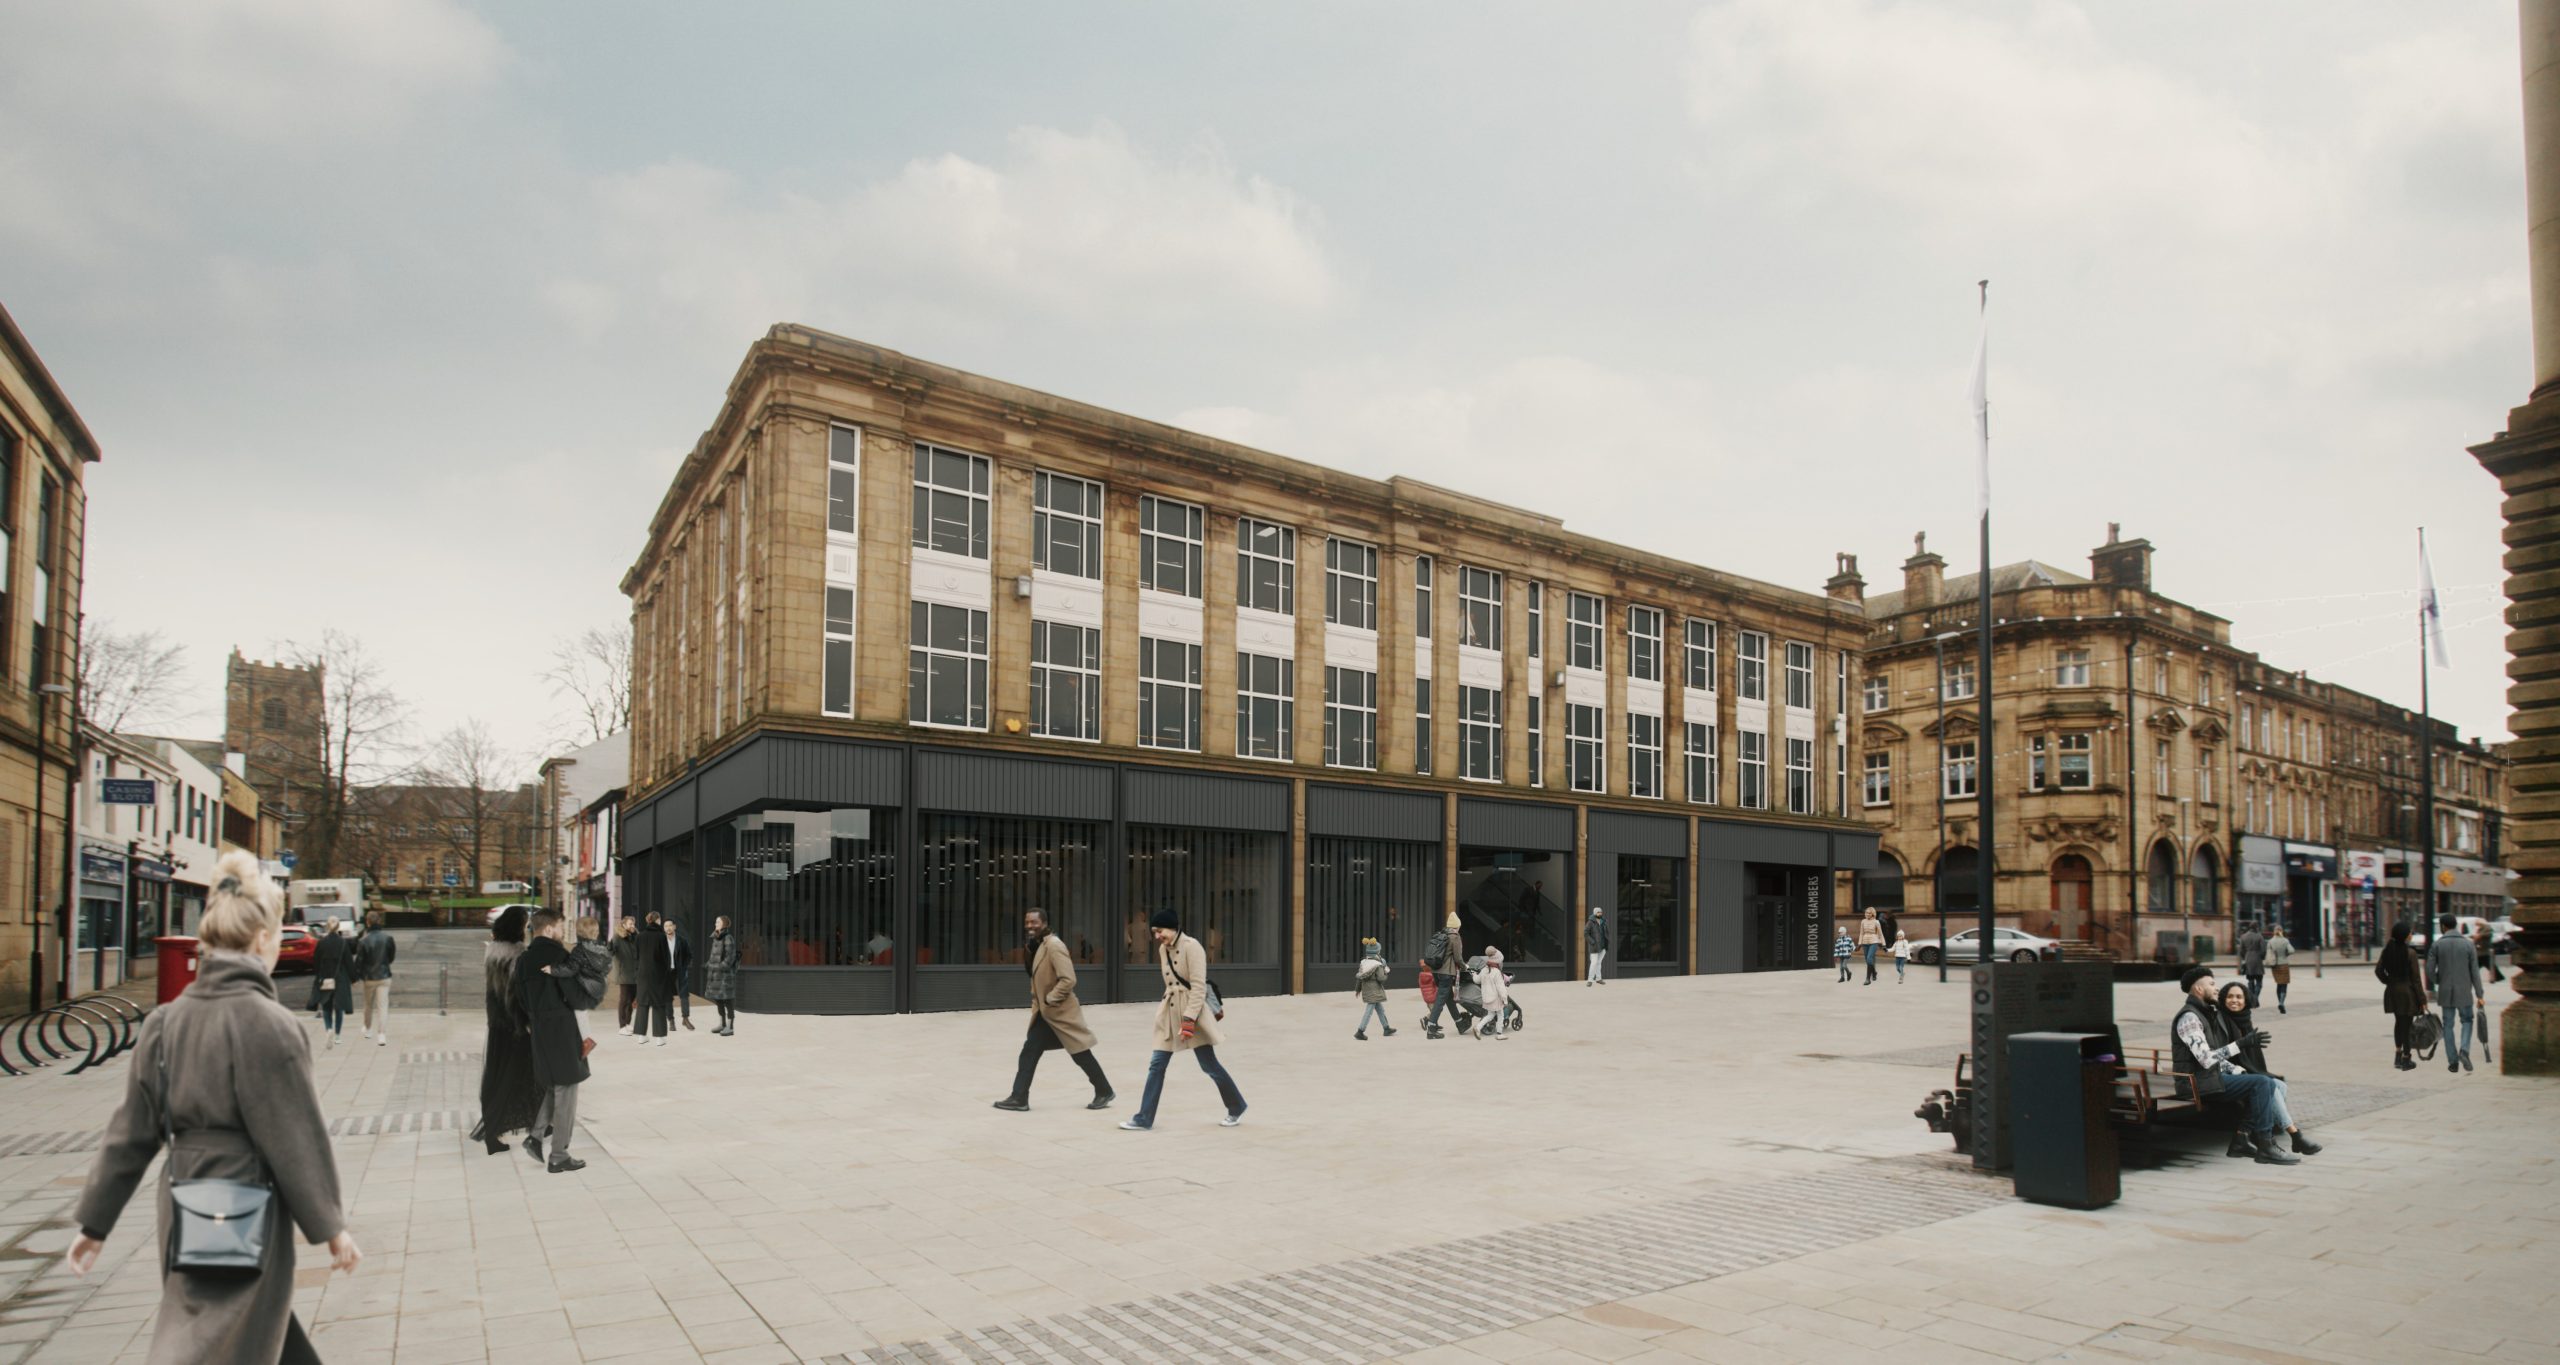 Burtons Chambers Co-Working Transformation and the Market Traders Decant Secure Planning Approval 